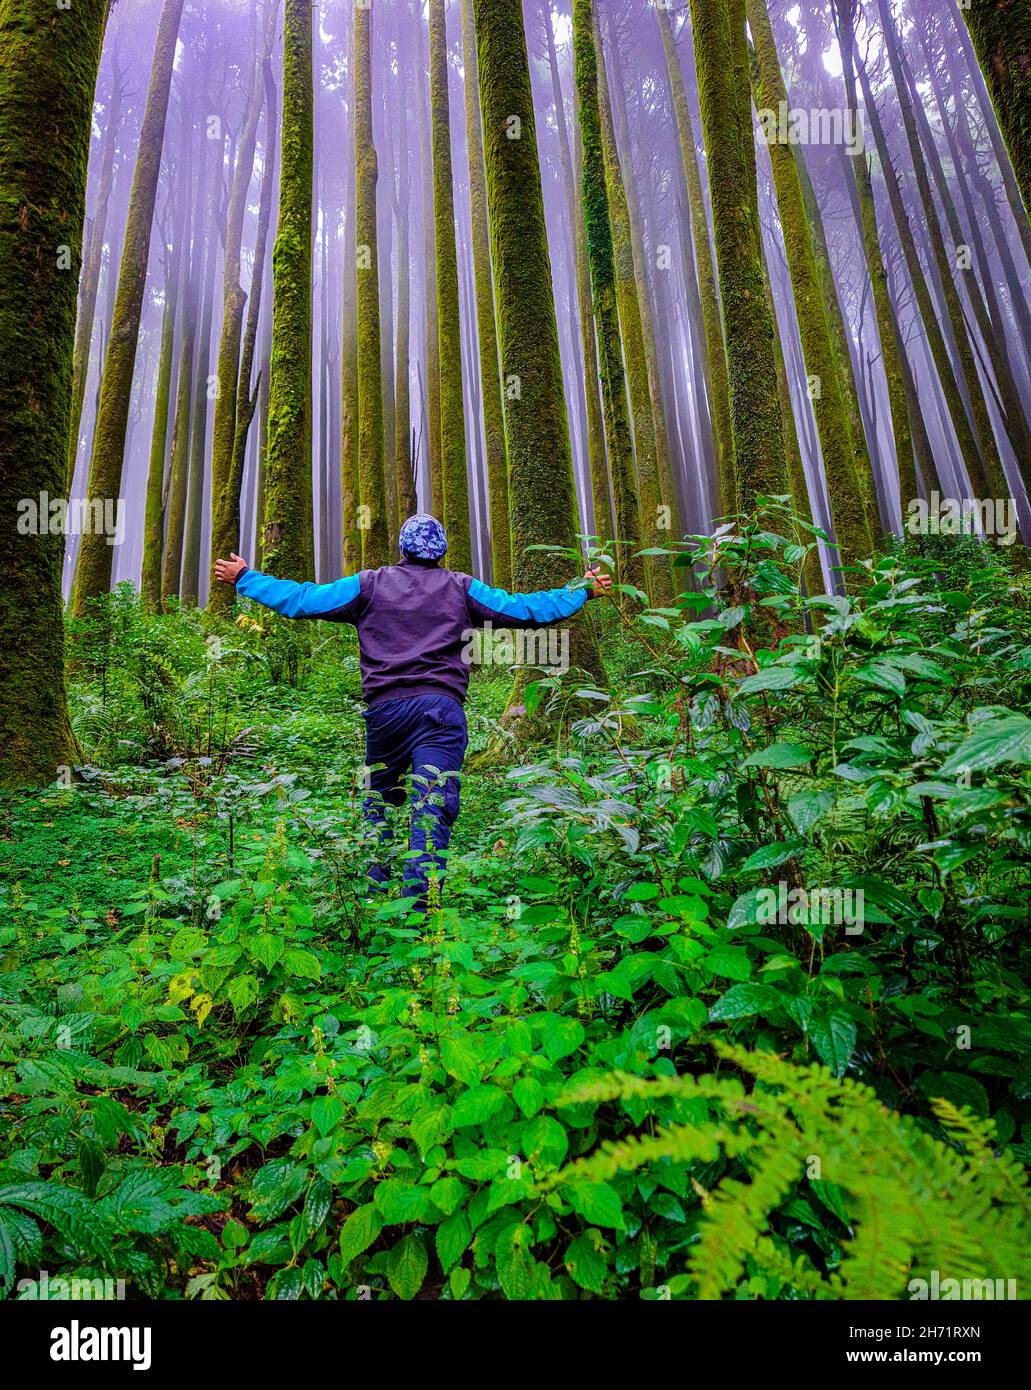 young man hiker at pine tree forest with white defused fog background at morning image is taken at mirik forests darjeeling west bengal india. Stock Photo